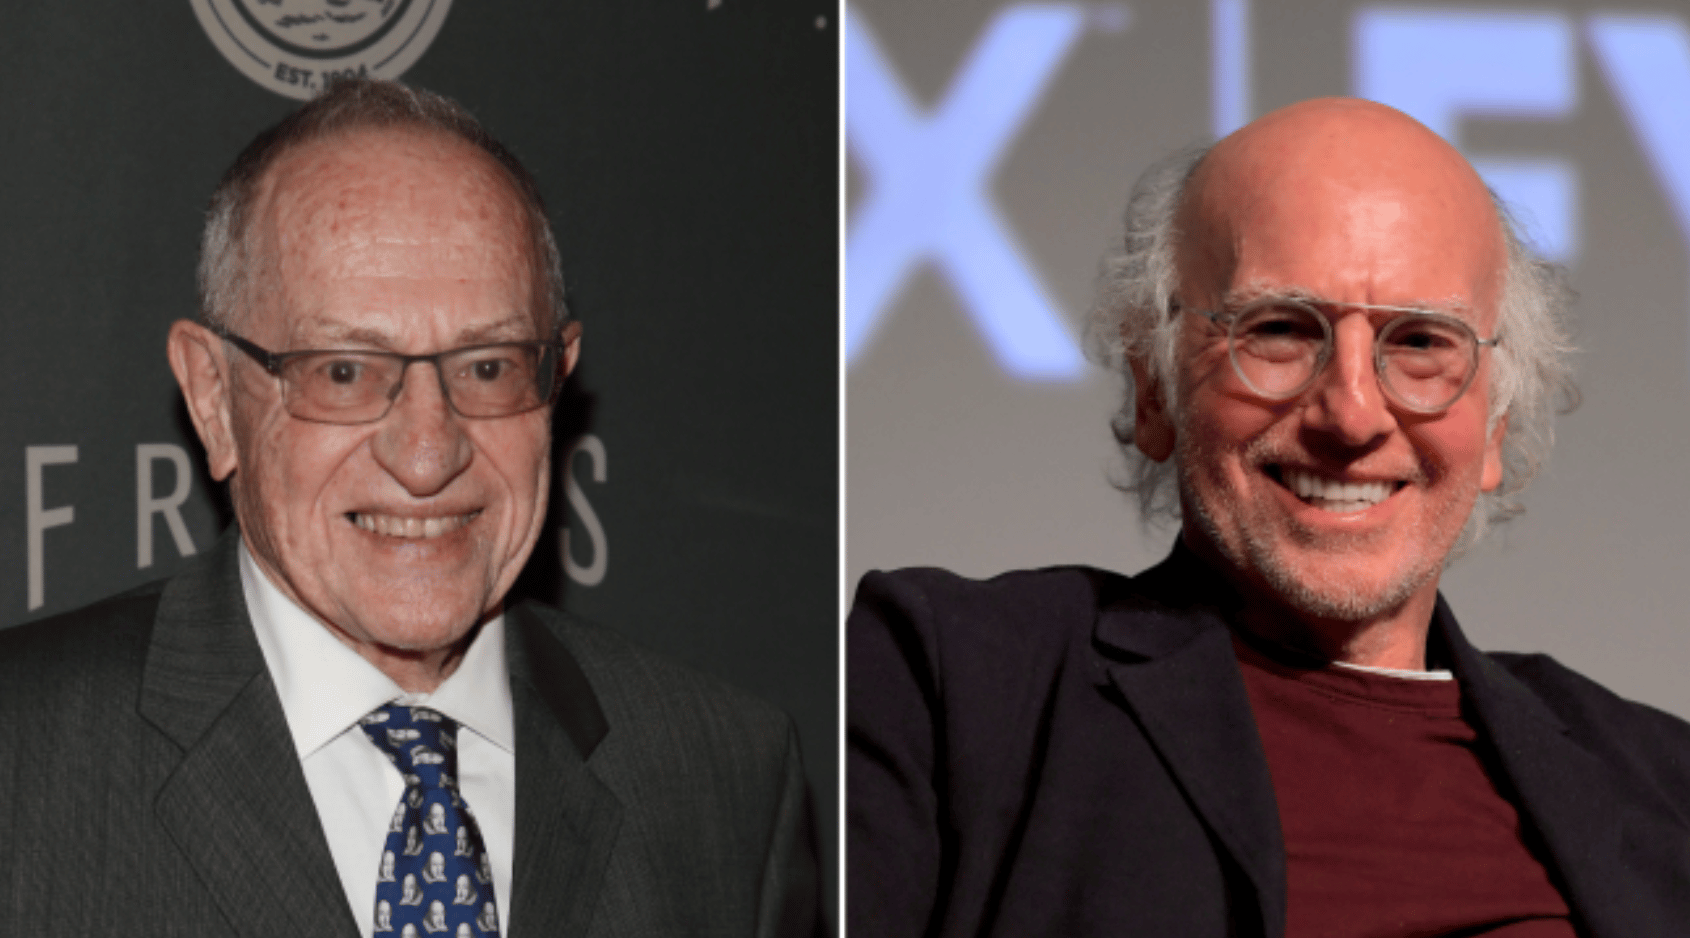 Alan Dershowitz Confirms Larry David ‘Called Me Disgusting and Said He Could Never Talk to Me’